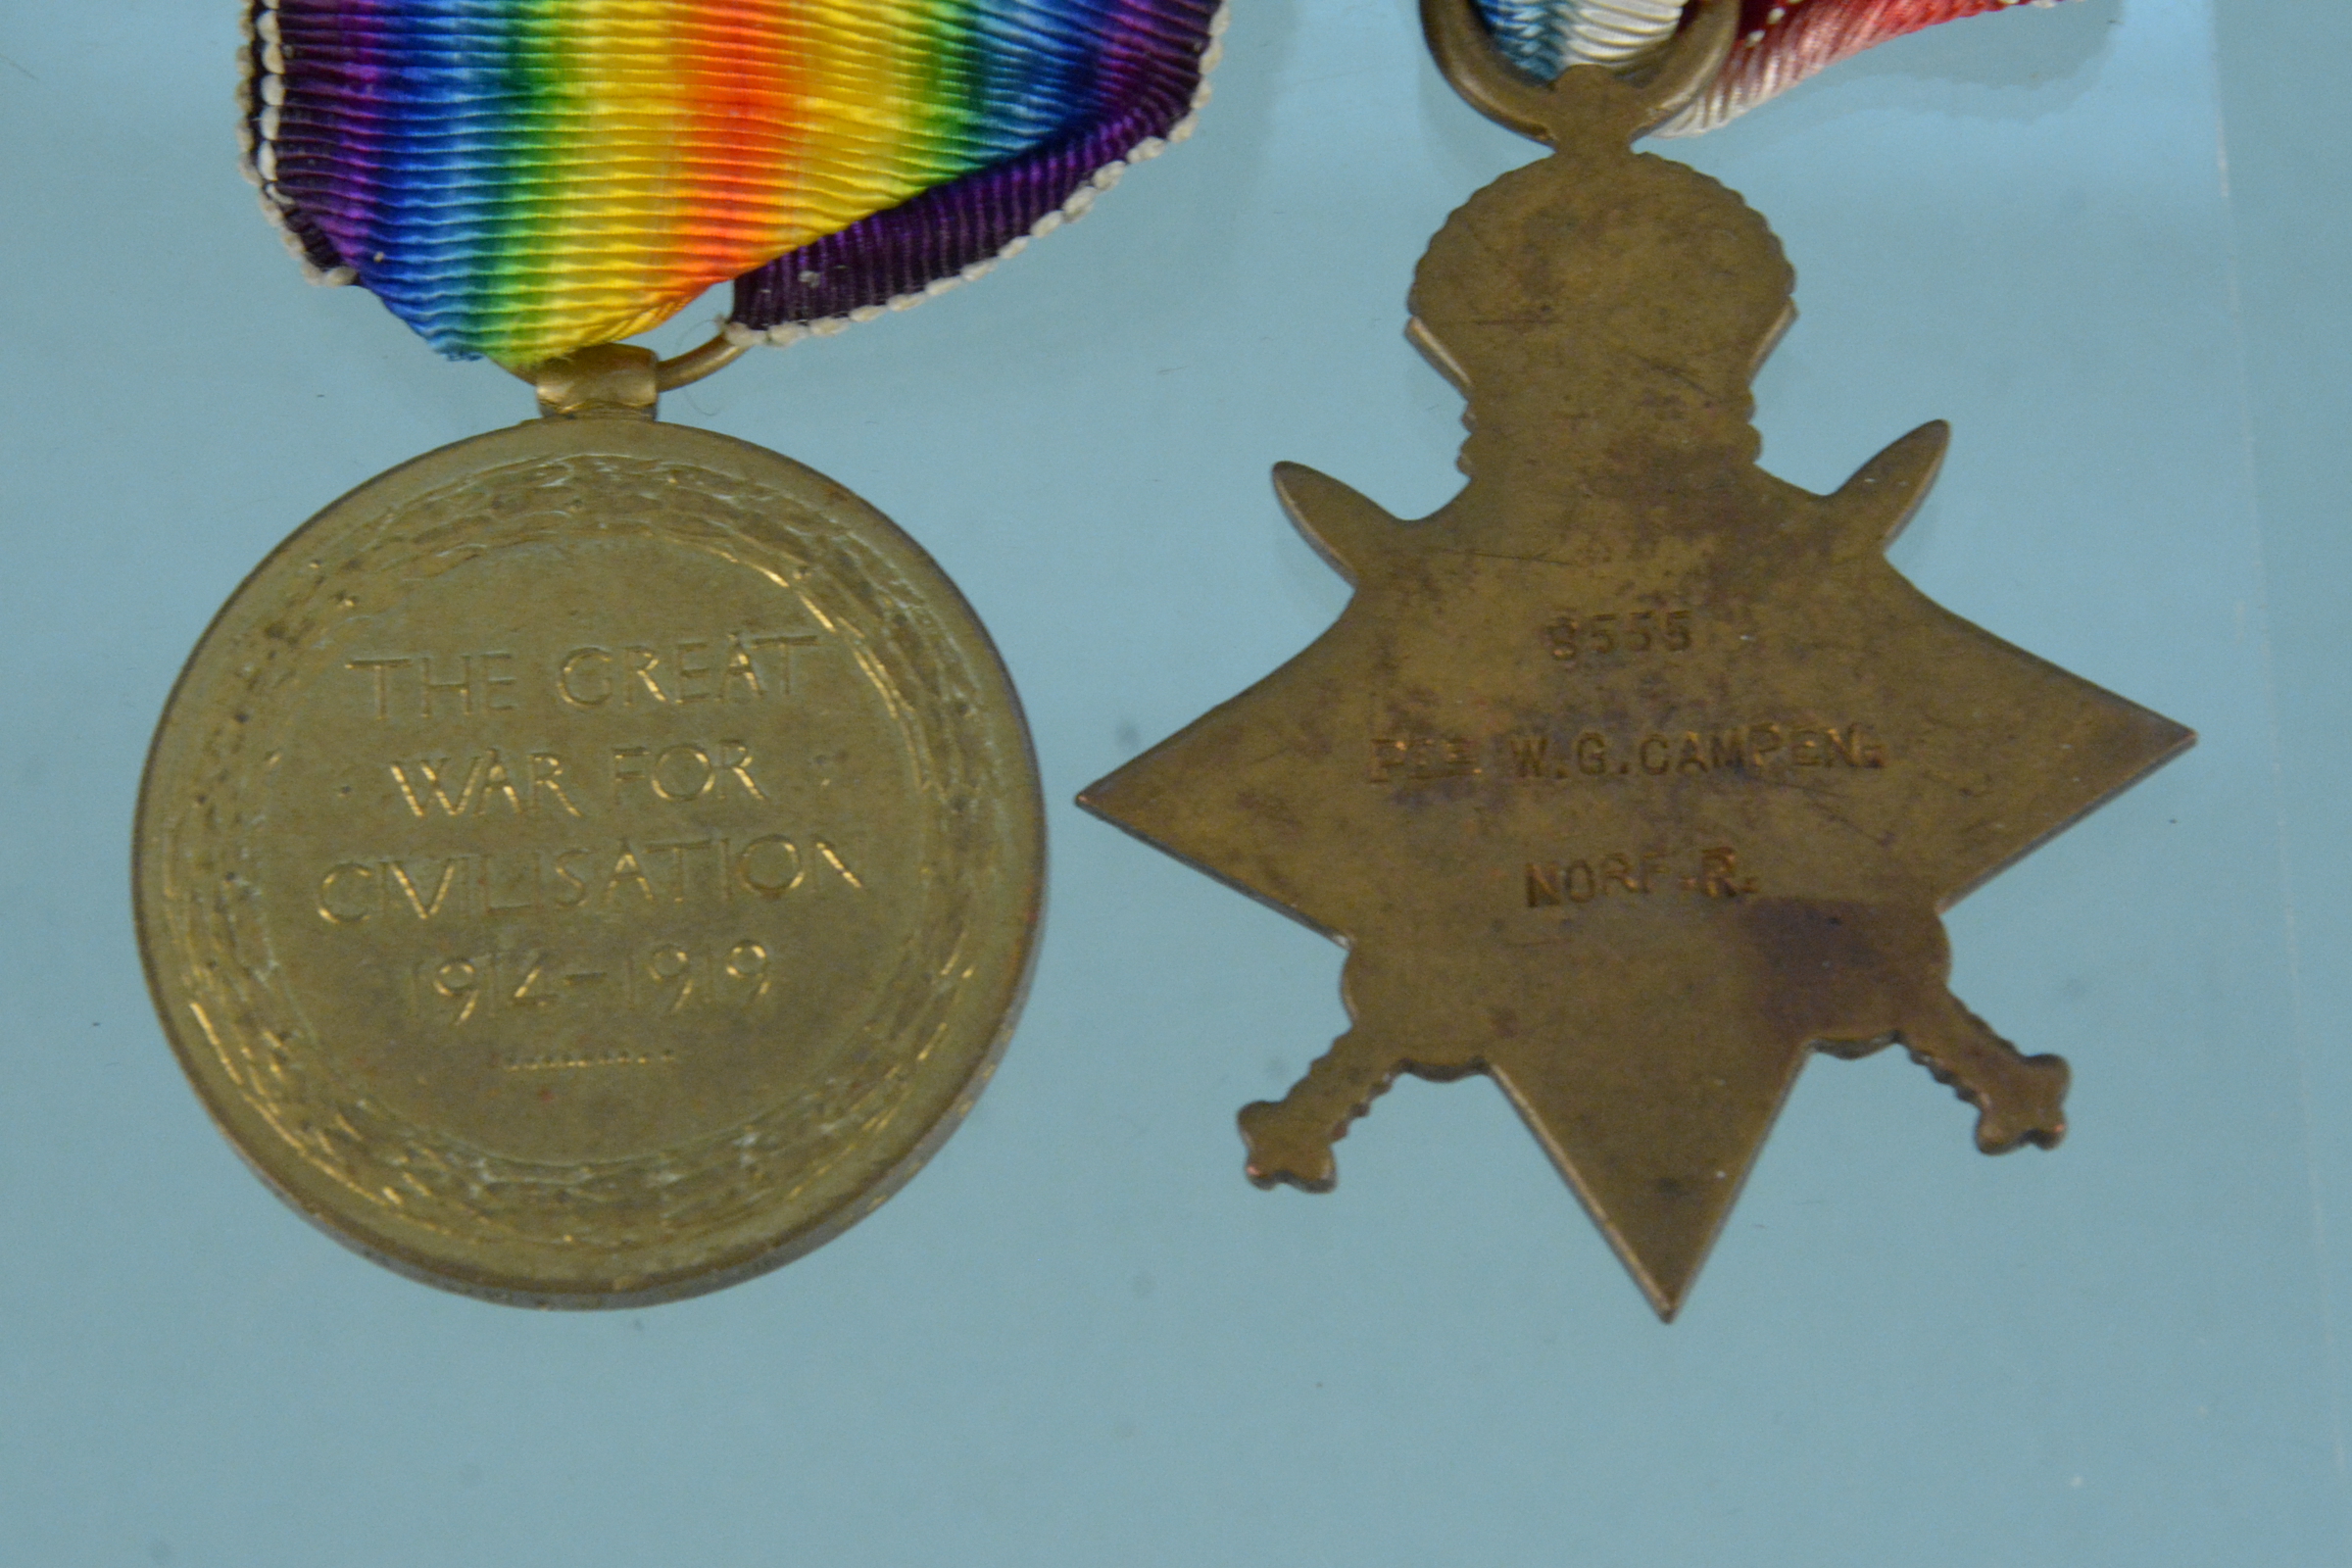 A 14/15 Star with Victory medal to 8555 Pte W.G.Campen Norf.R., born Cockfield Suffolk, D.O.W. - Image 3 of 3